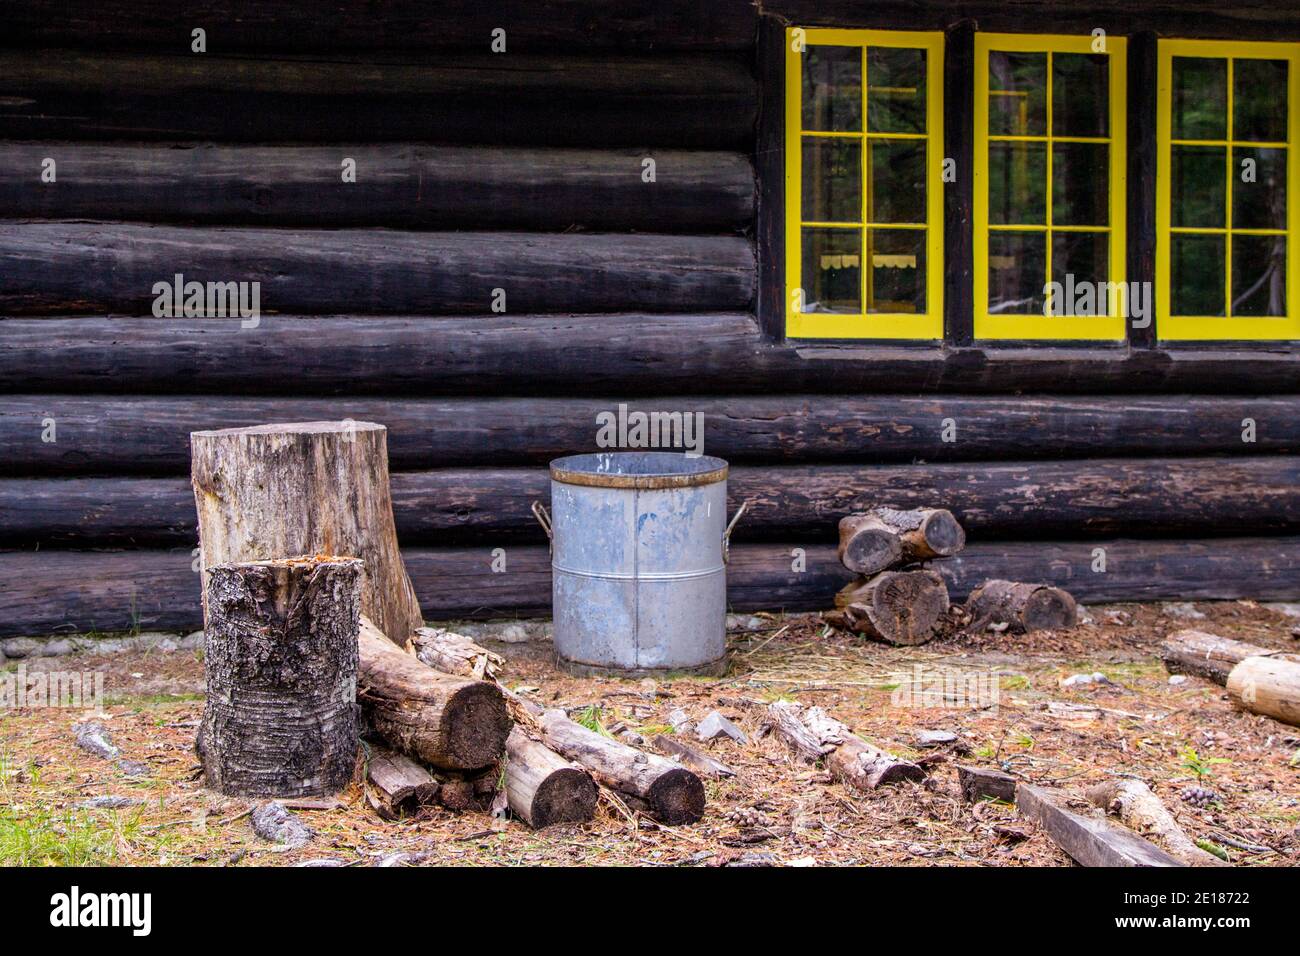 Getting Ready For Winter. Chopping block for firewood outside a remote rustic Northwoods log cabin. This is a public property within a state park. Stock Photo